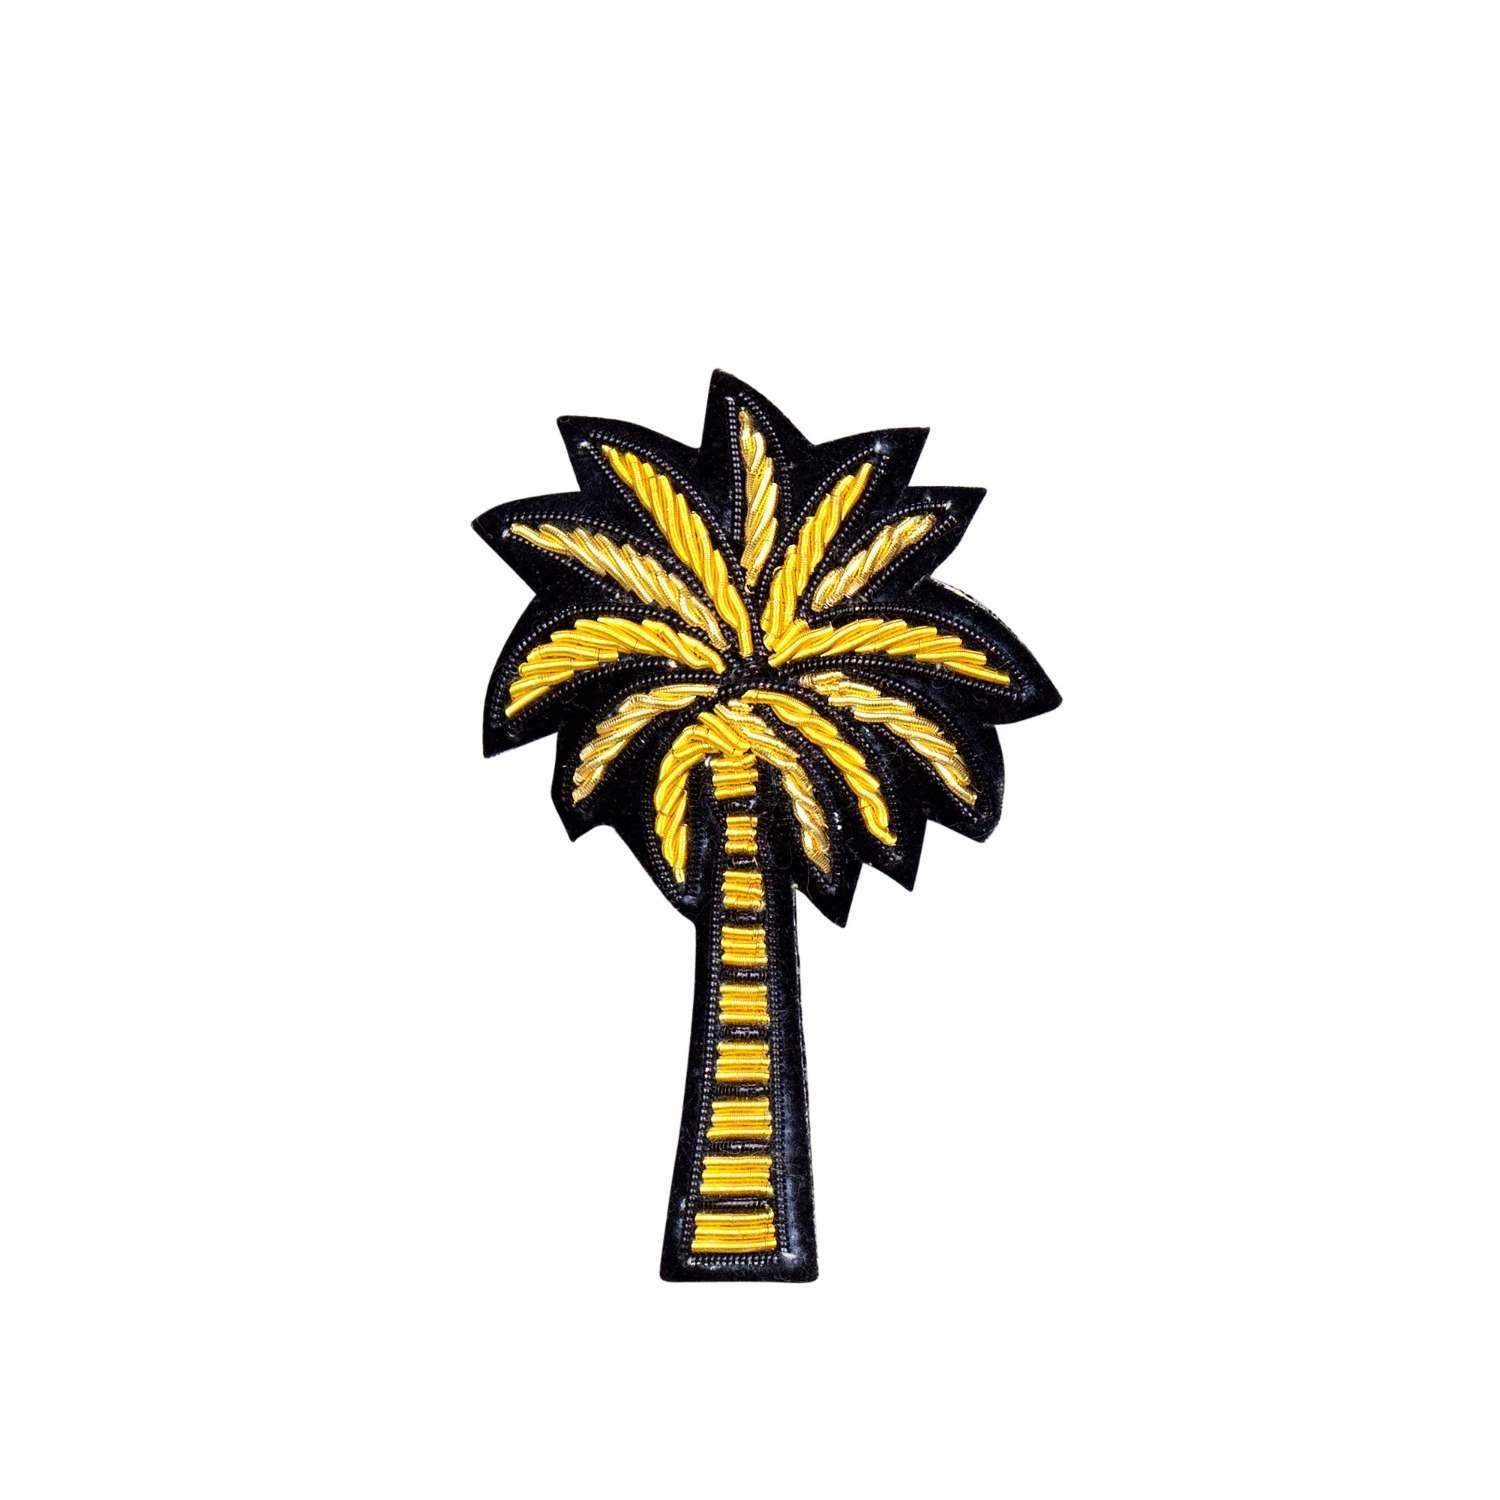 An image of Golden Palm Tree Brooch